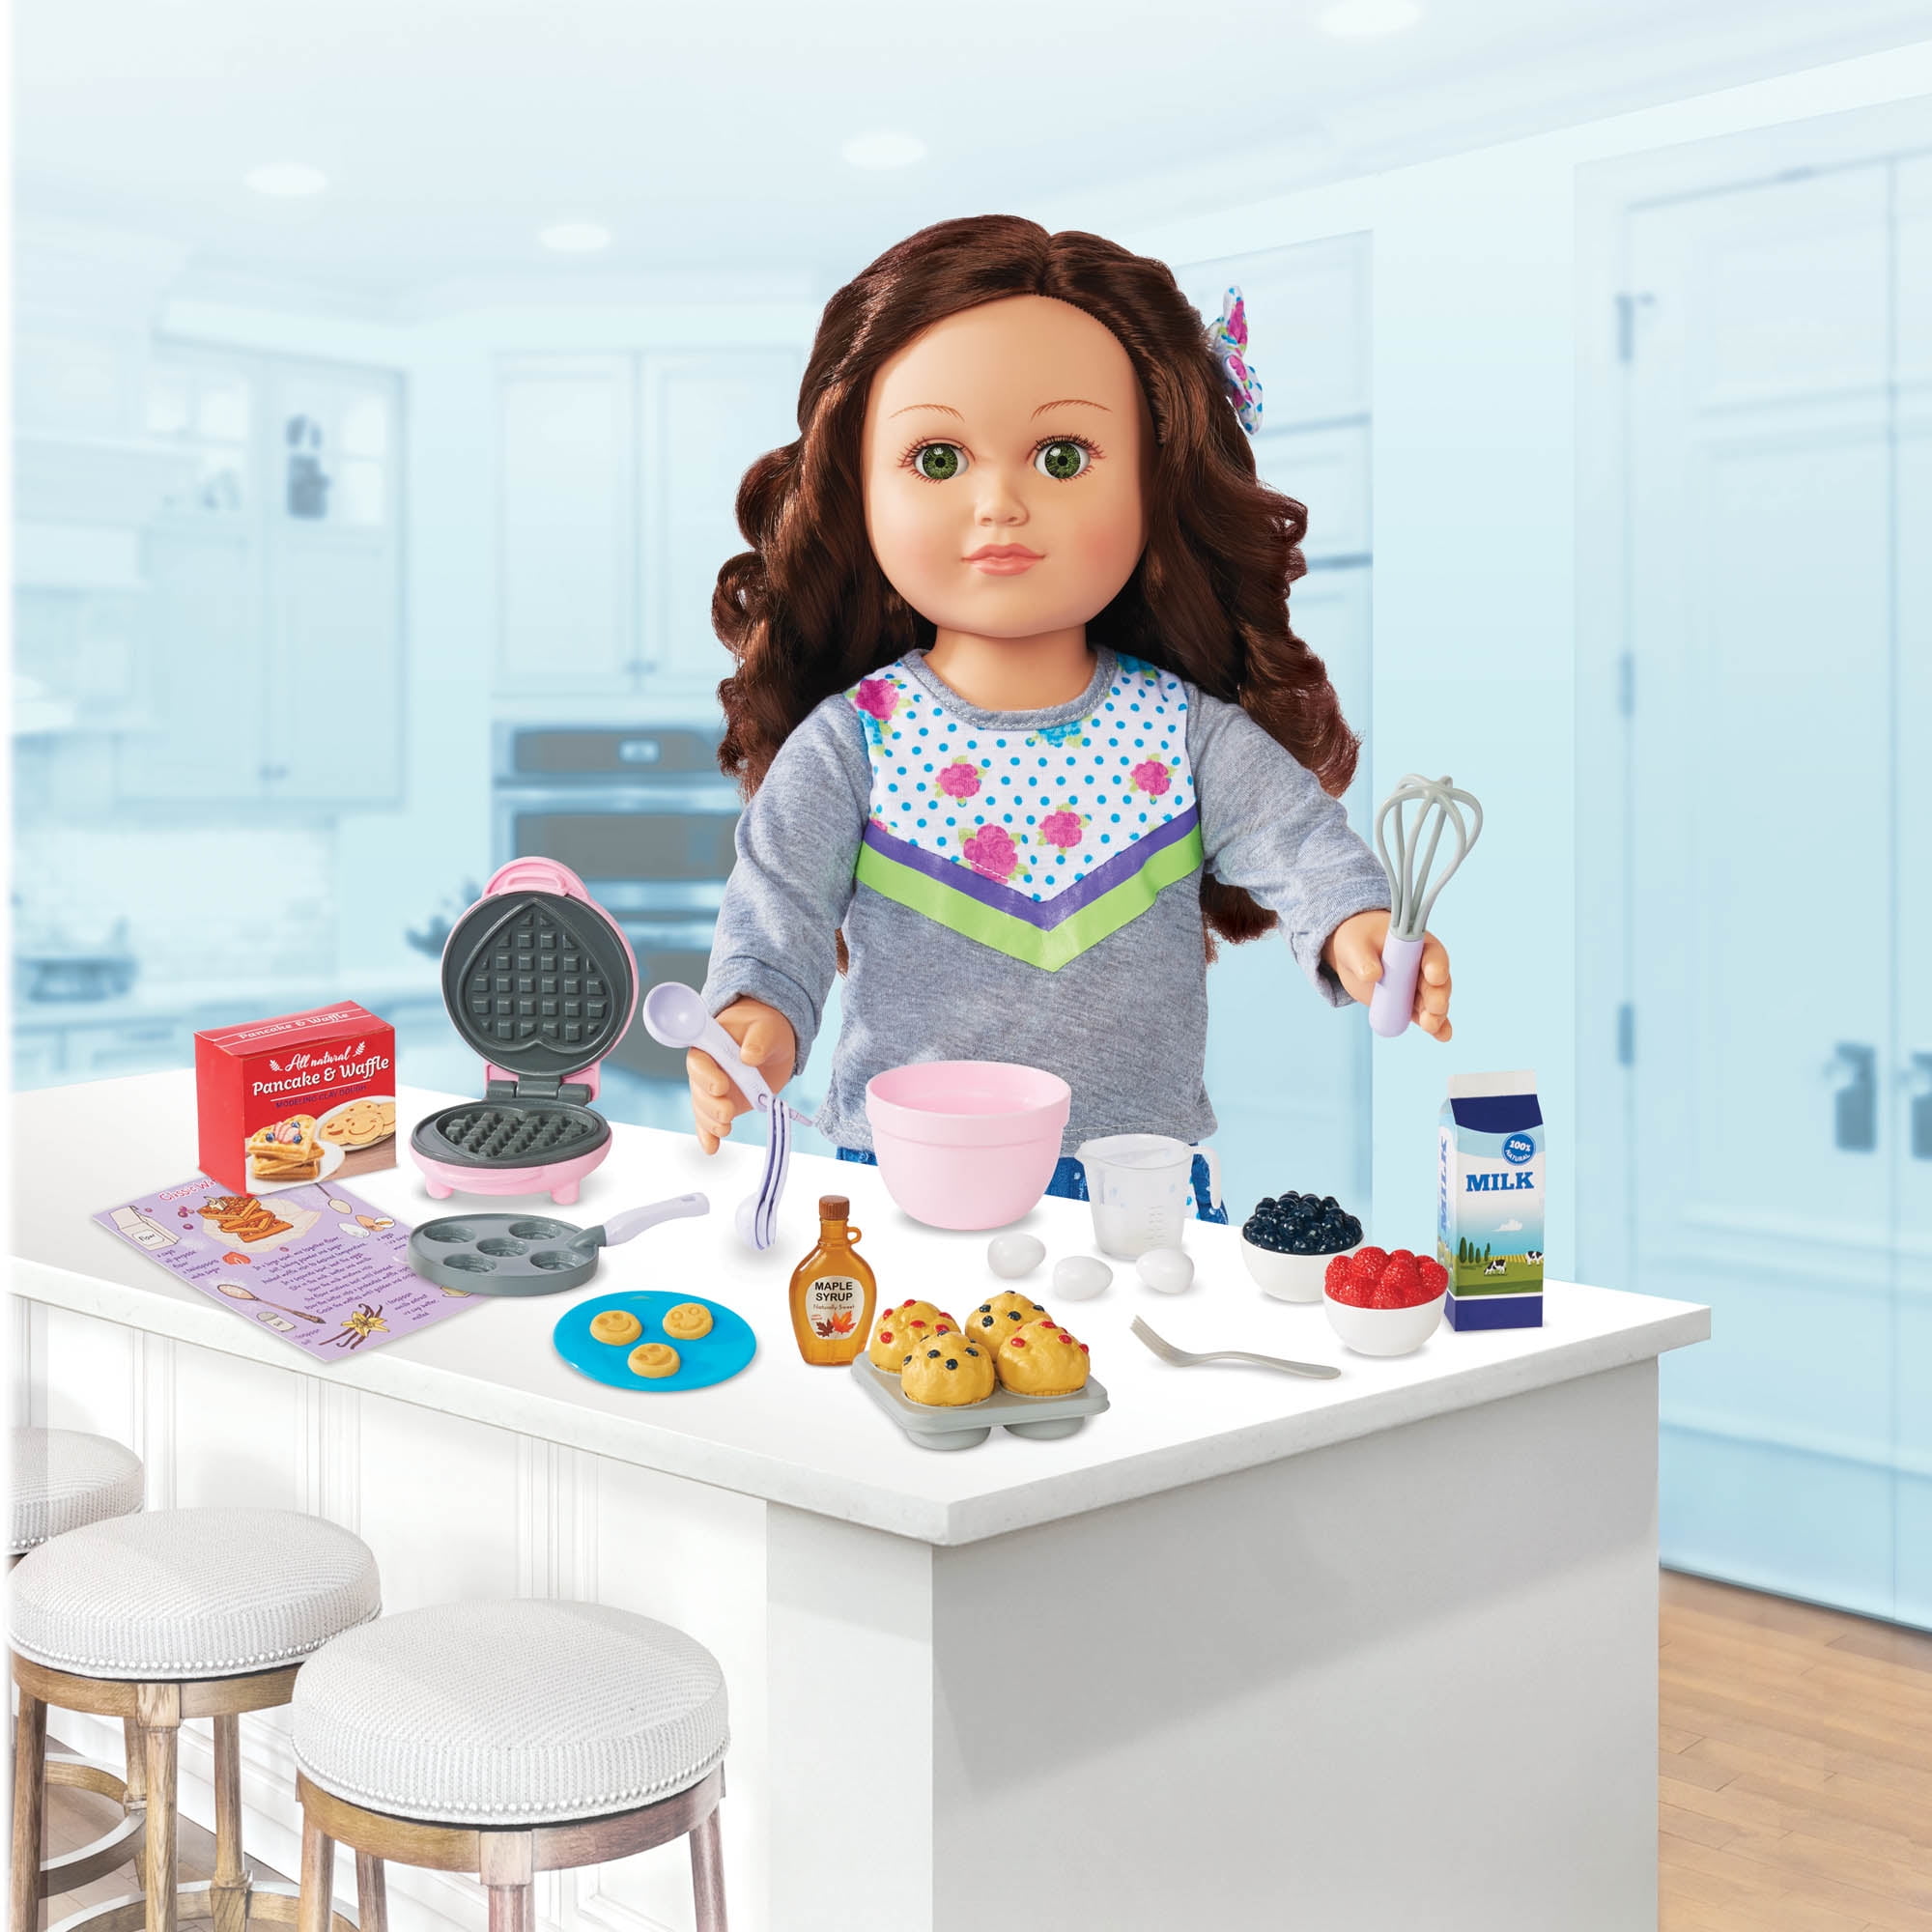 Angelo's Bakery™ Playset for 18-inch Dolls